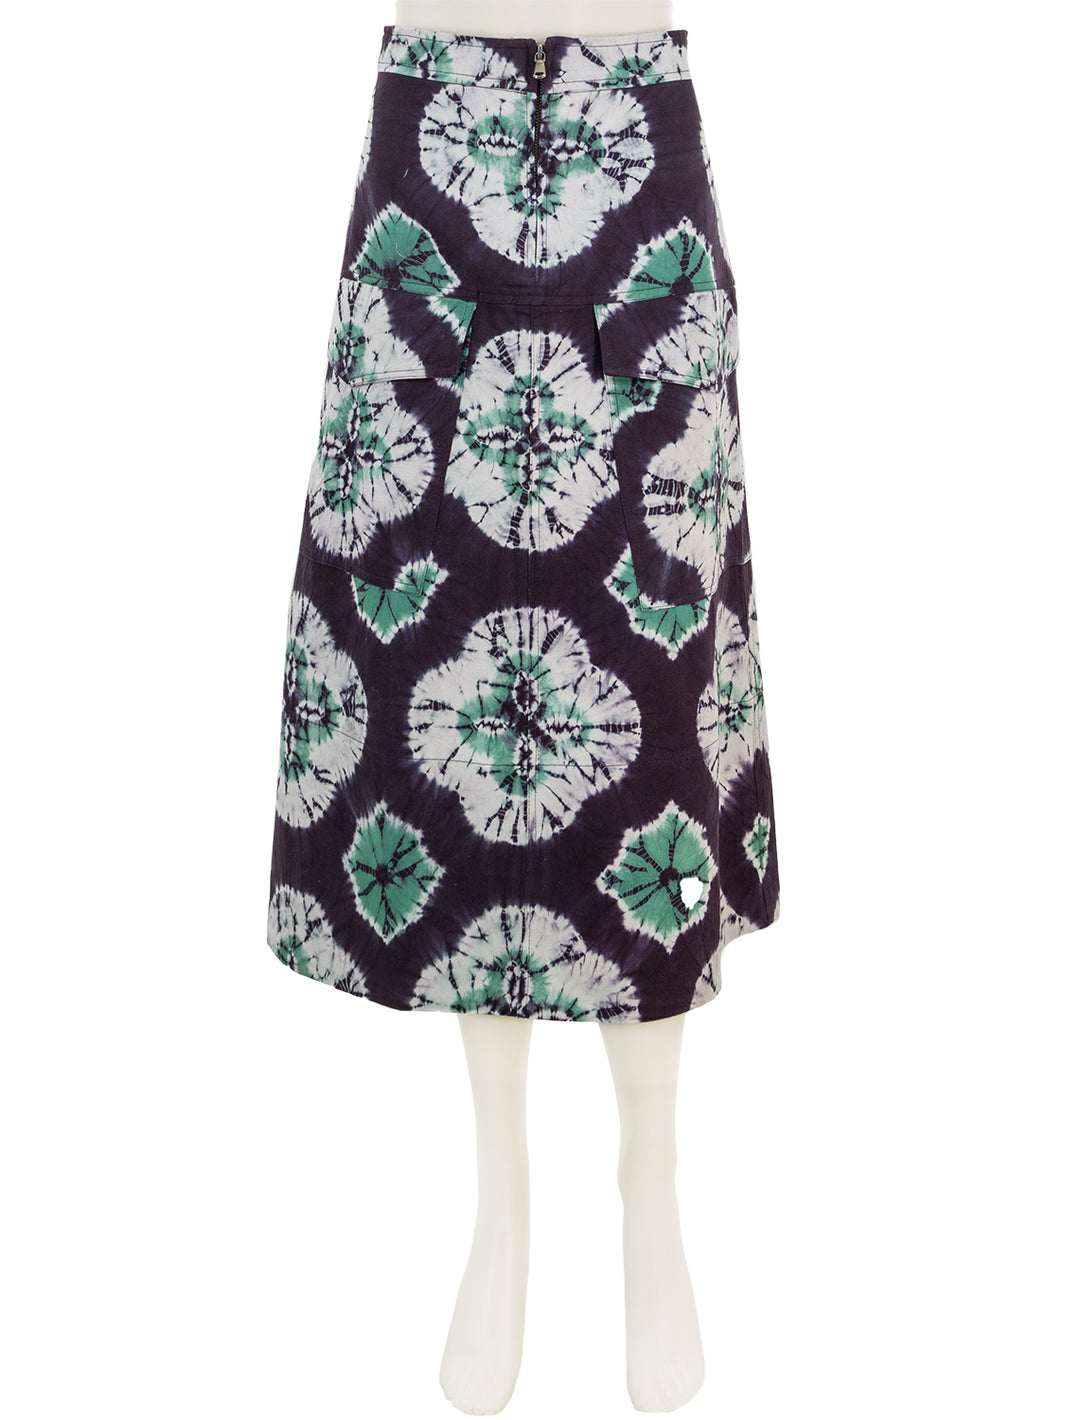 Front view of Sea NY's aveline tie dye print skirt in teal.